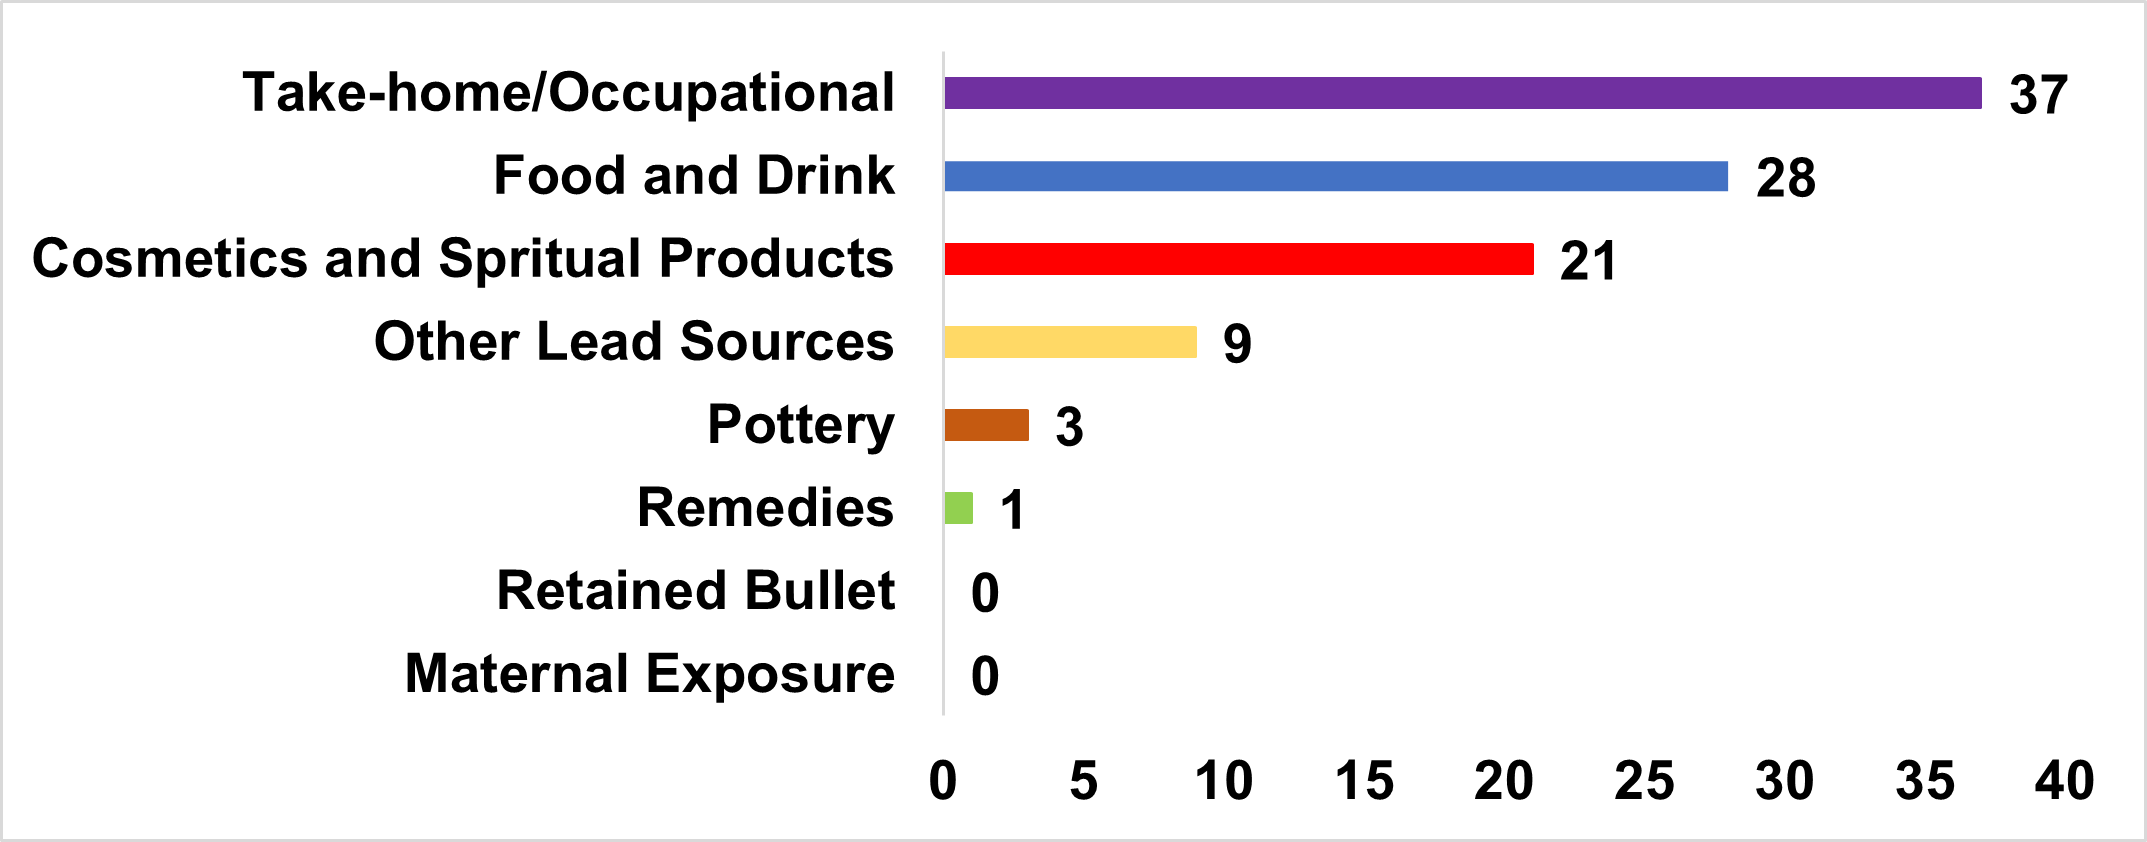 Non-housing lead exposure sources: Occupational 37, food/drink 28, cosmetics 21, other 9, pottery 3, remedies 1, bullet & matern